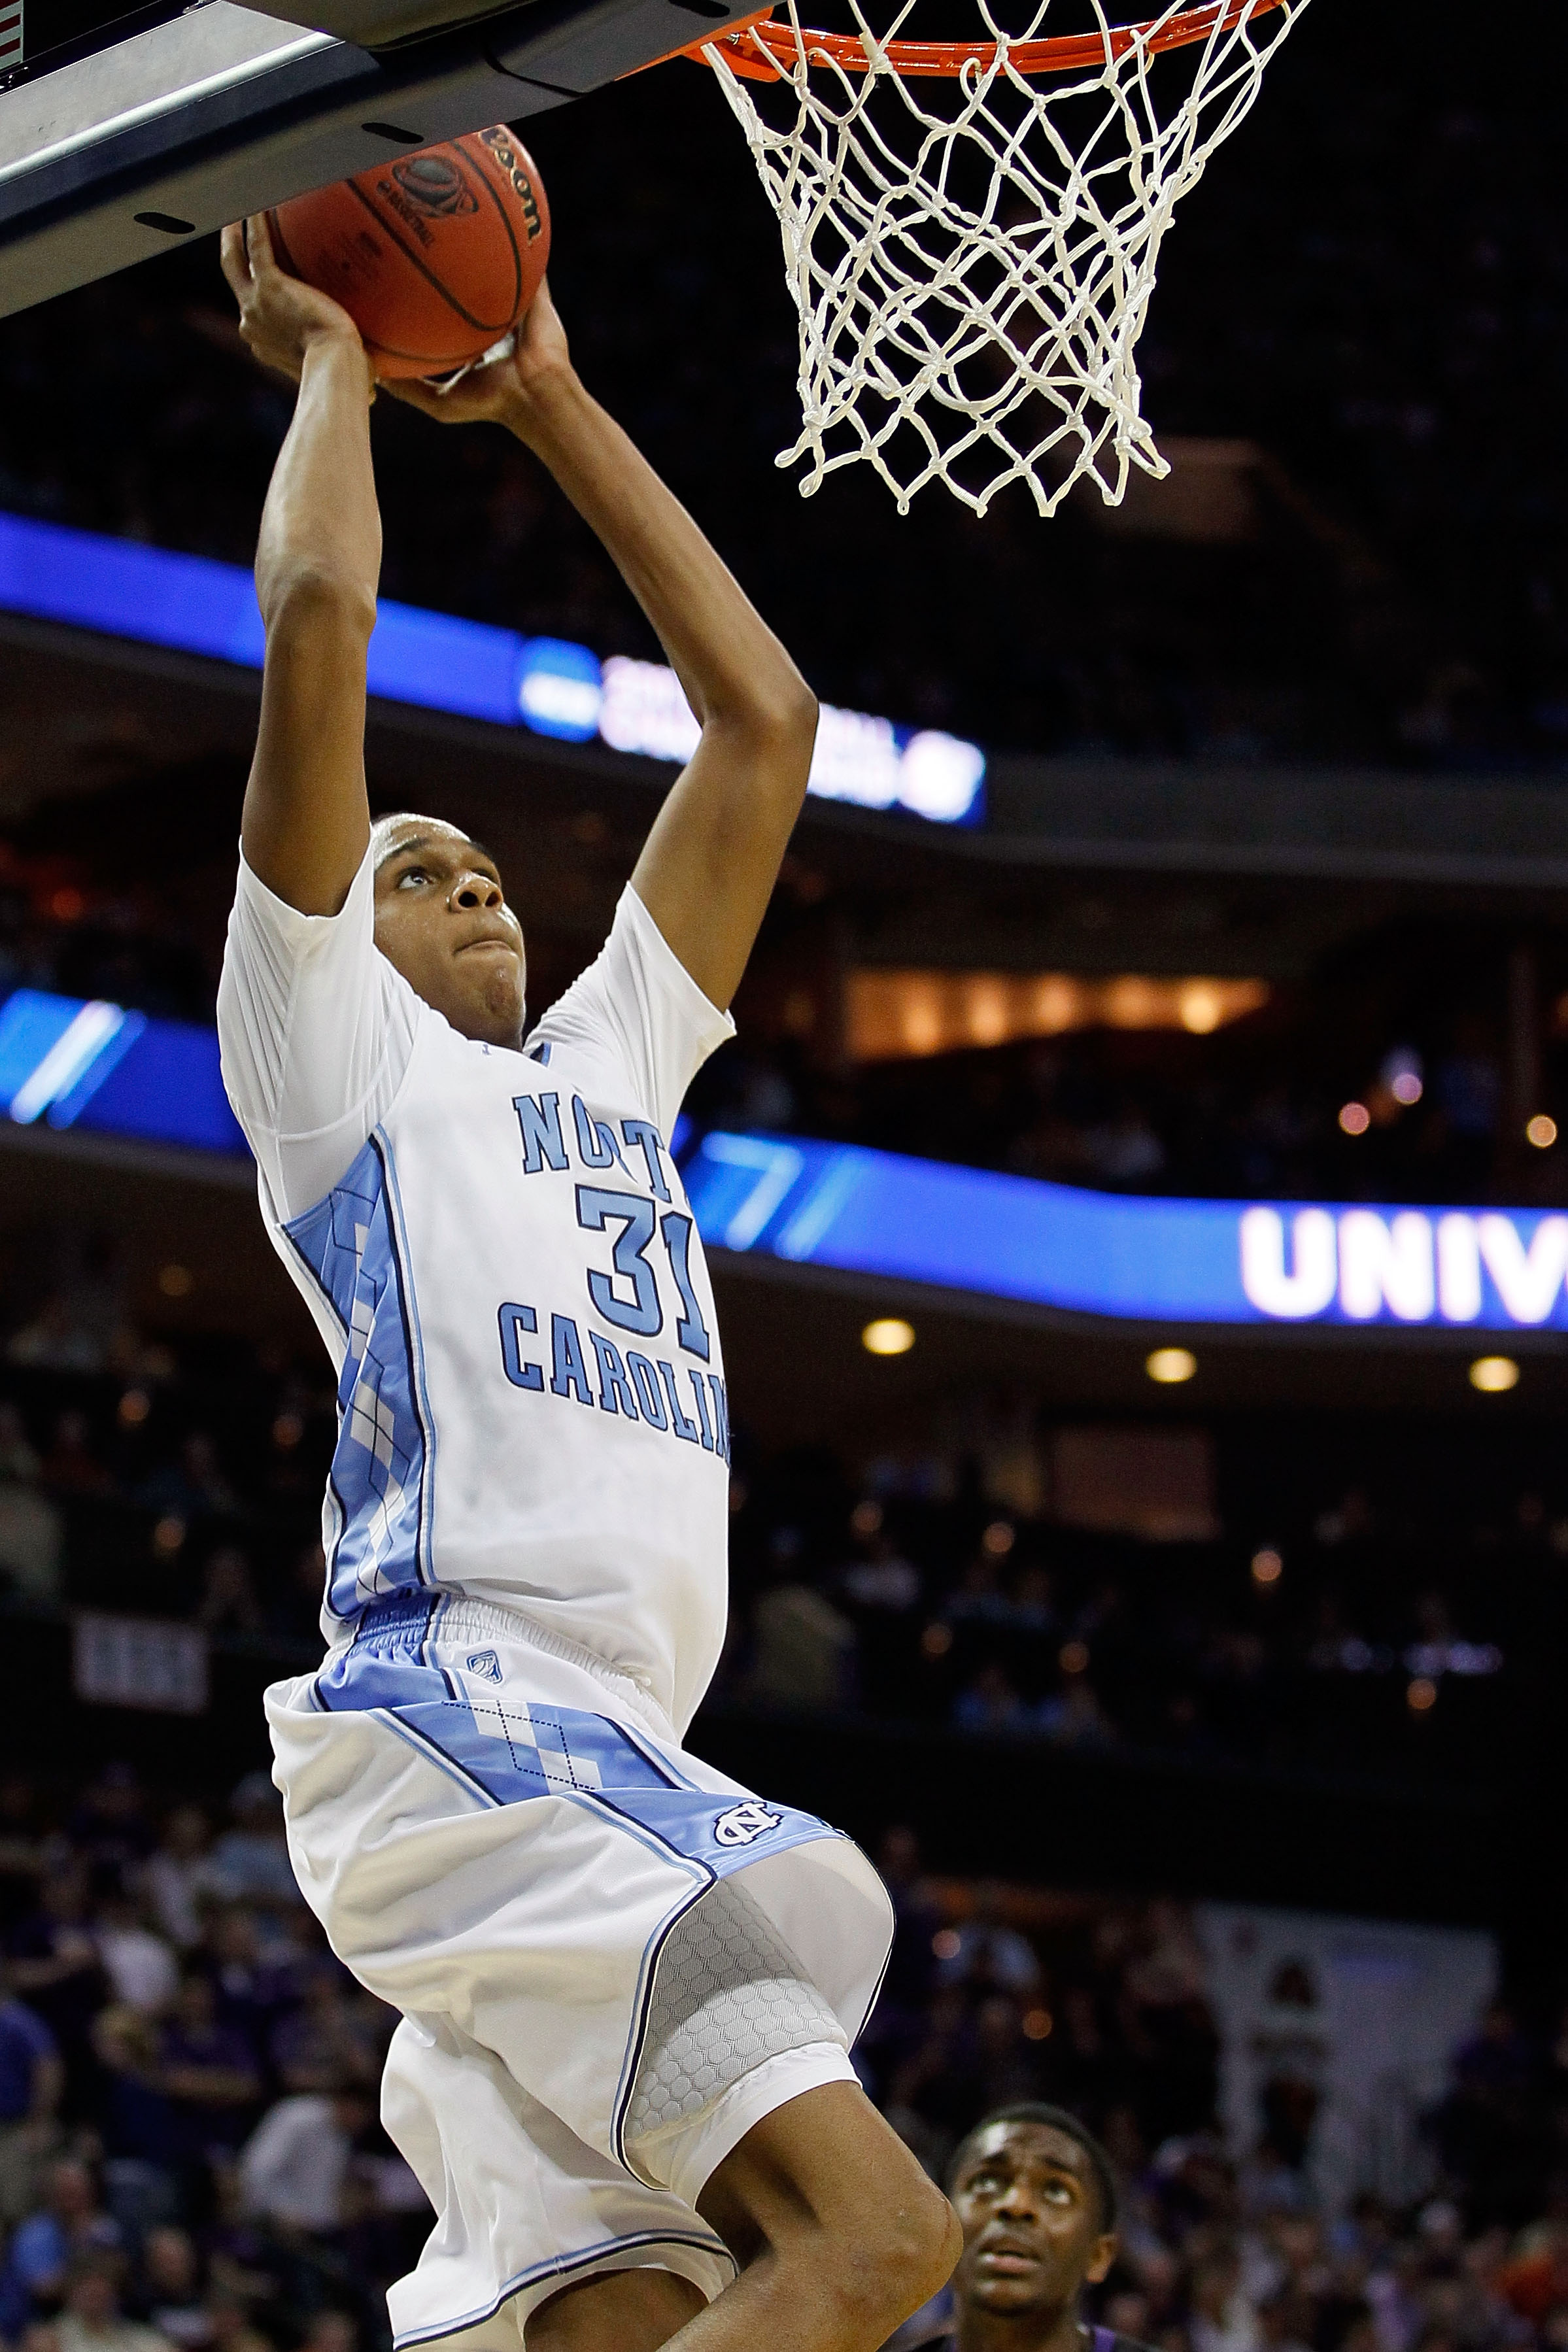 CHARLOTTE, NC - MARCH 20:  John Henson #31 of the North Carolina Tar Heels goes up to dunk the ball while taking on the Michigan Wolverines during the third round of the 2011 NCAA men's basketball tournament at Time Warner Cable Arena on March 20, 2011 in